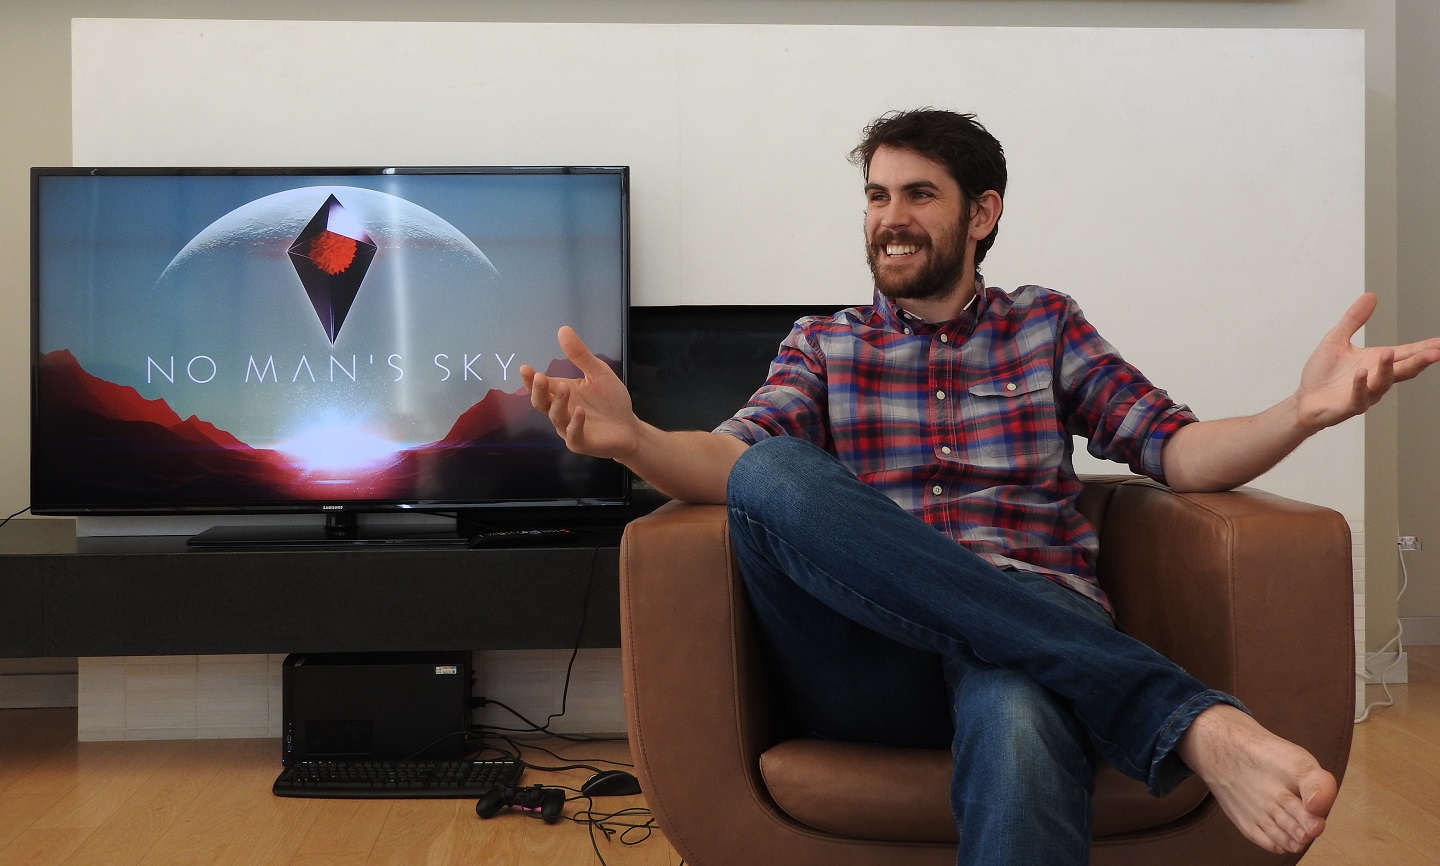 No Man’s Sky Director: I Received Death Threats Over Delaying the Game